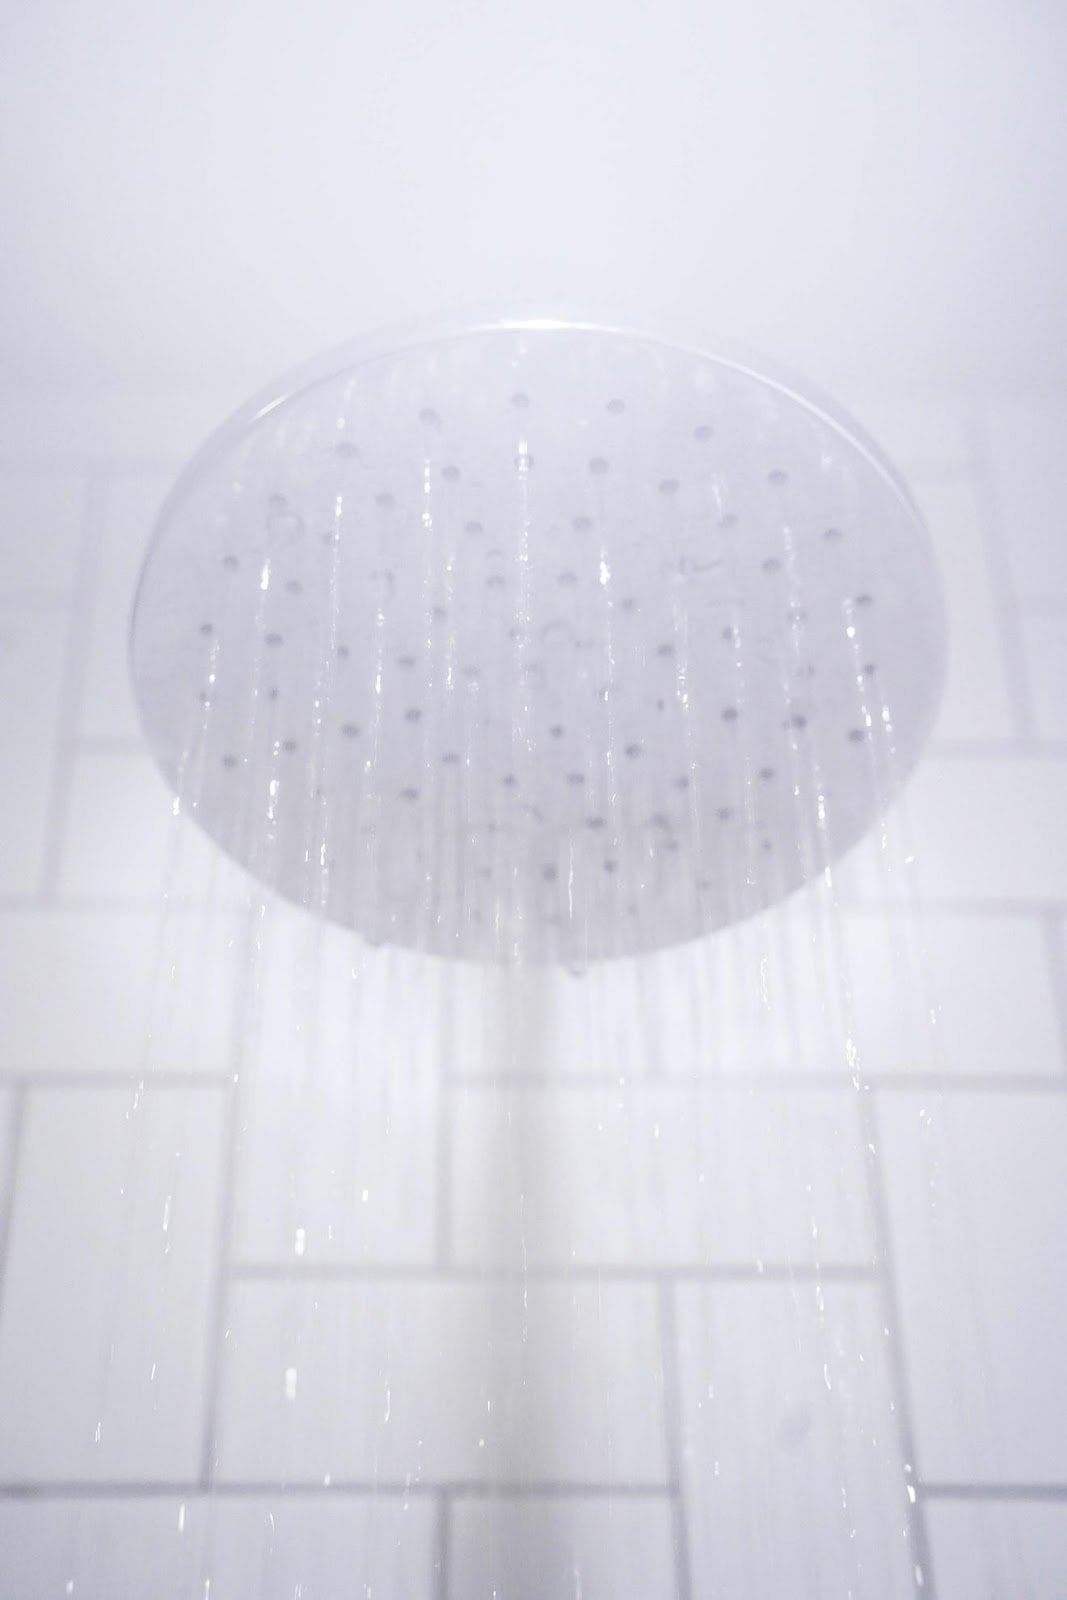 shower head pouring water